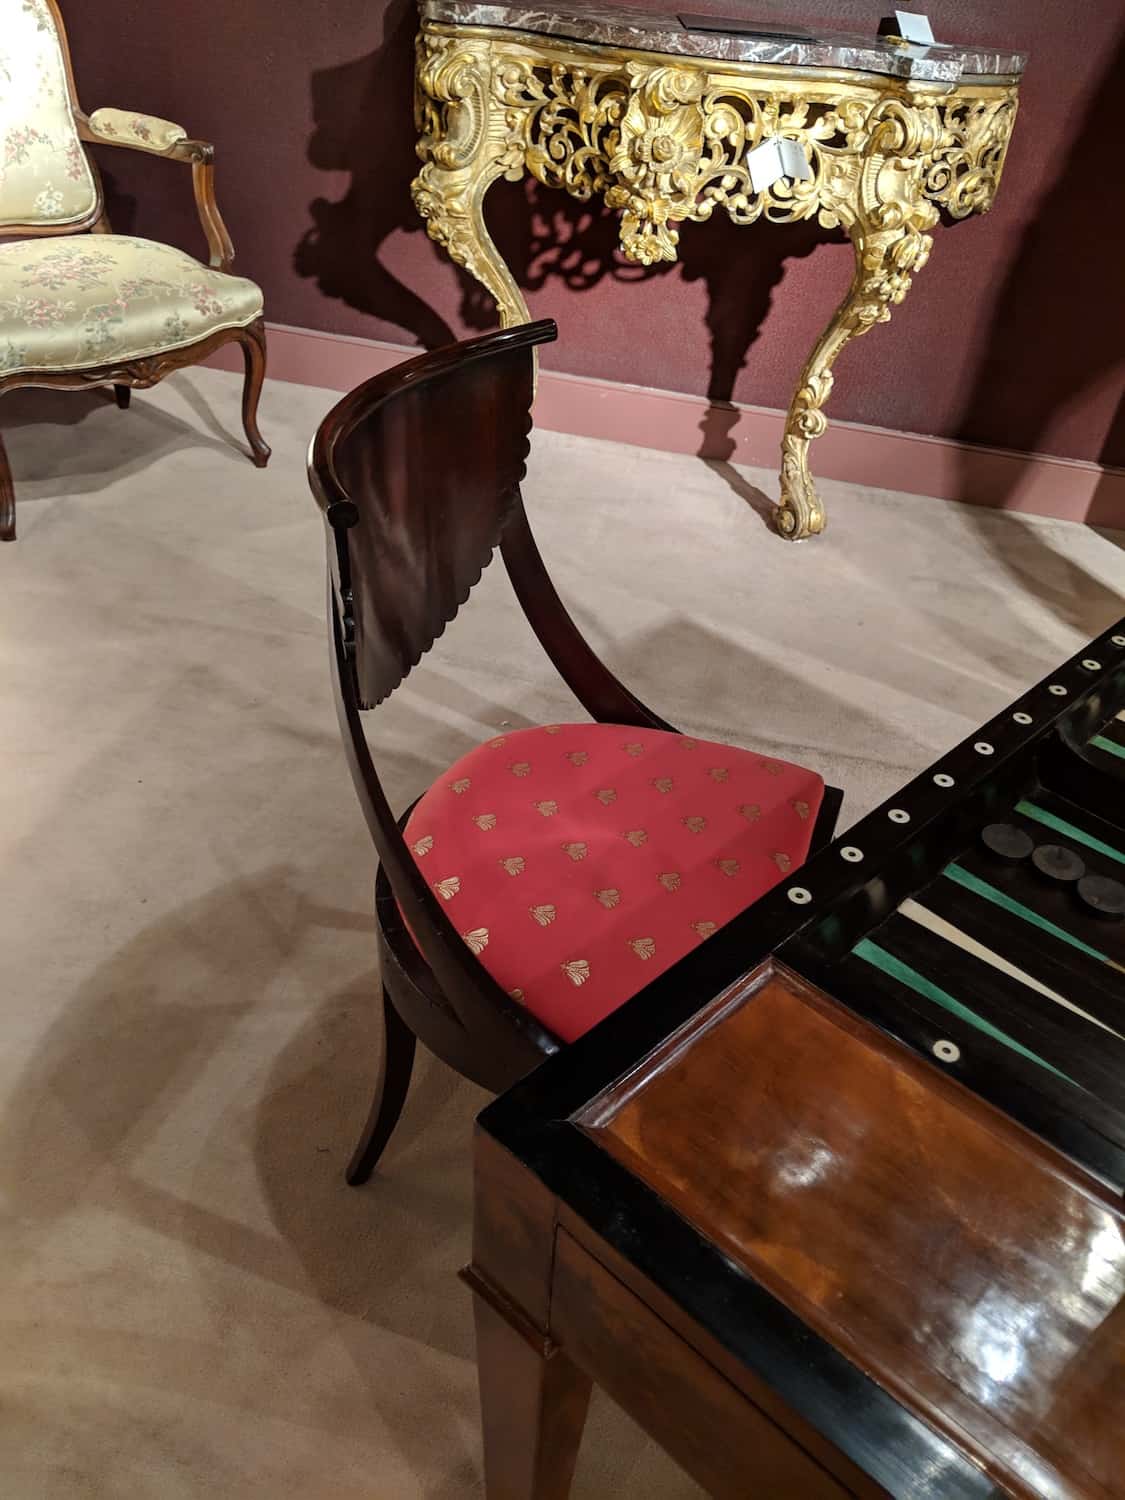 Scalloped details on this antique chair in New Orleans